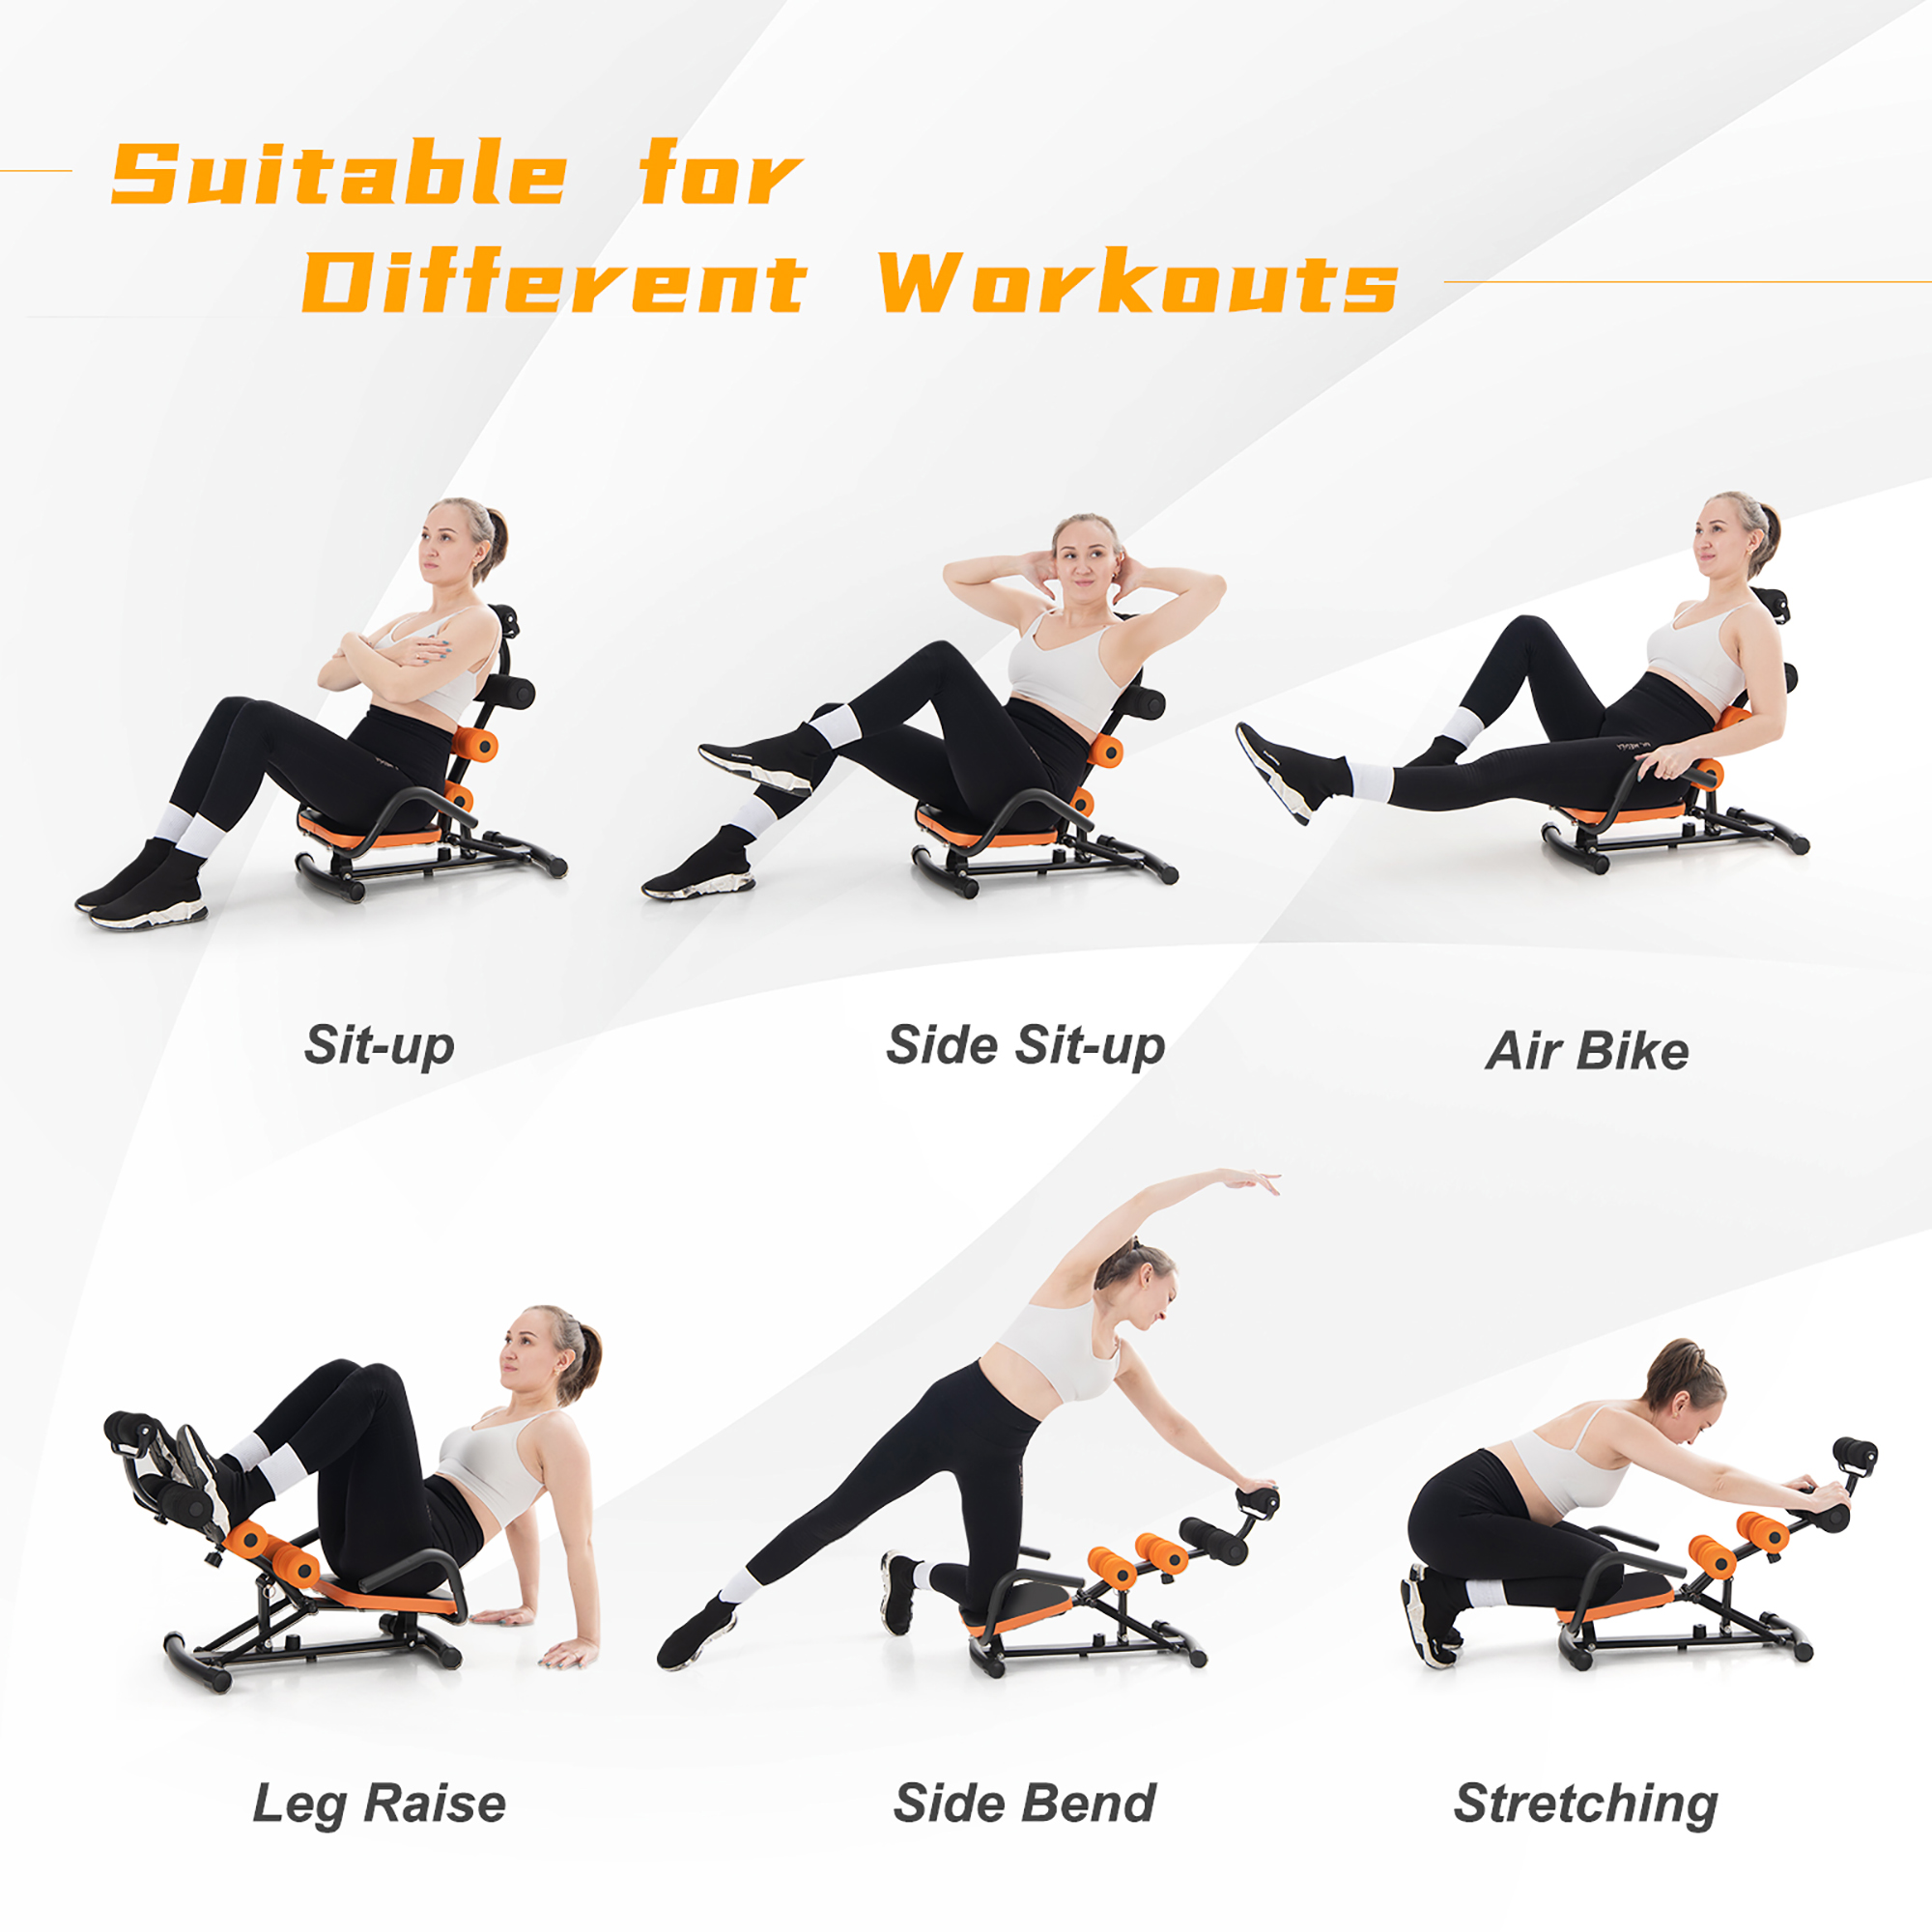 Costway Core Ab Trainer Bench Abdominal Stomach Exerciser Workout Gym Fitness Machine - image 7 of 9